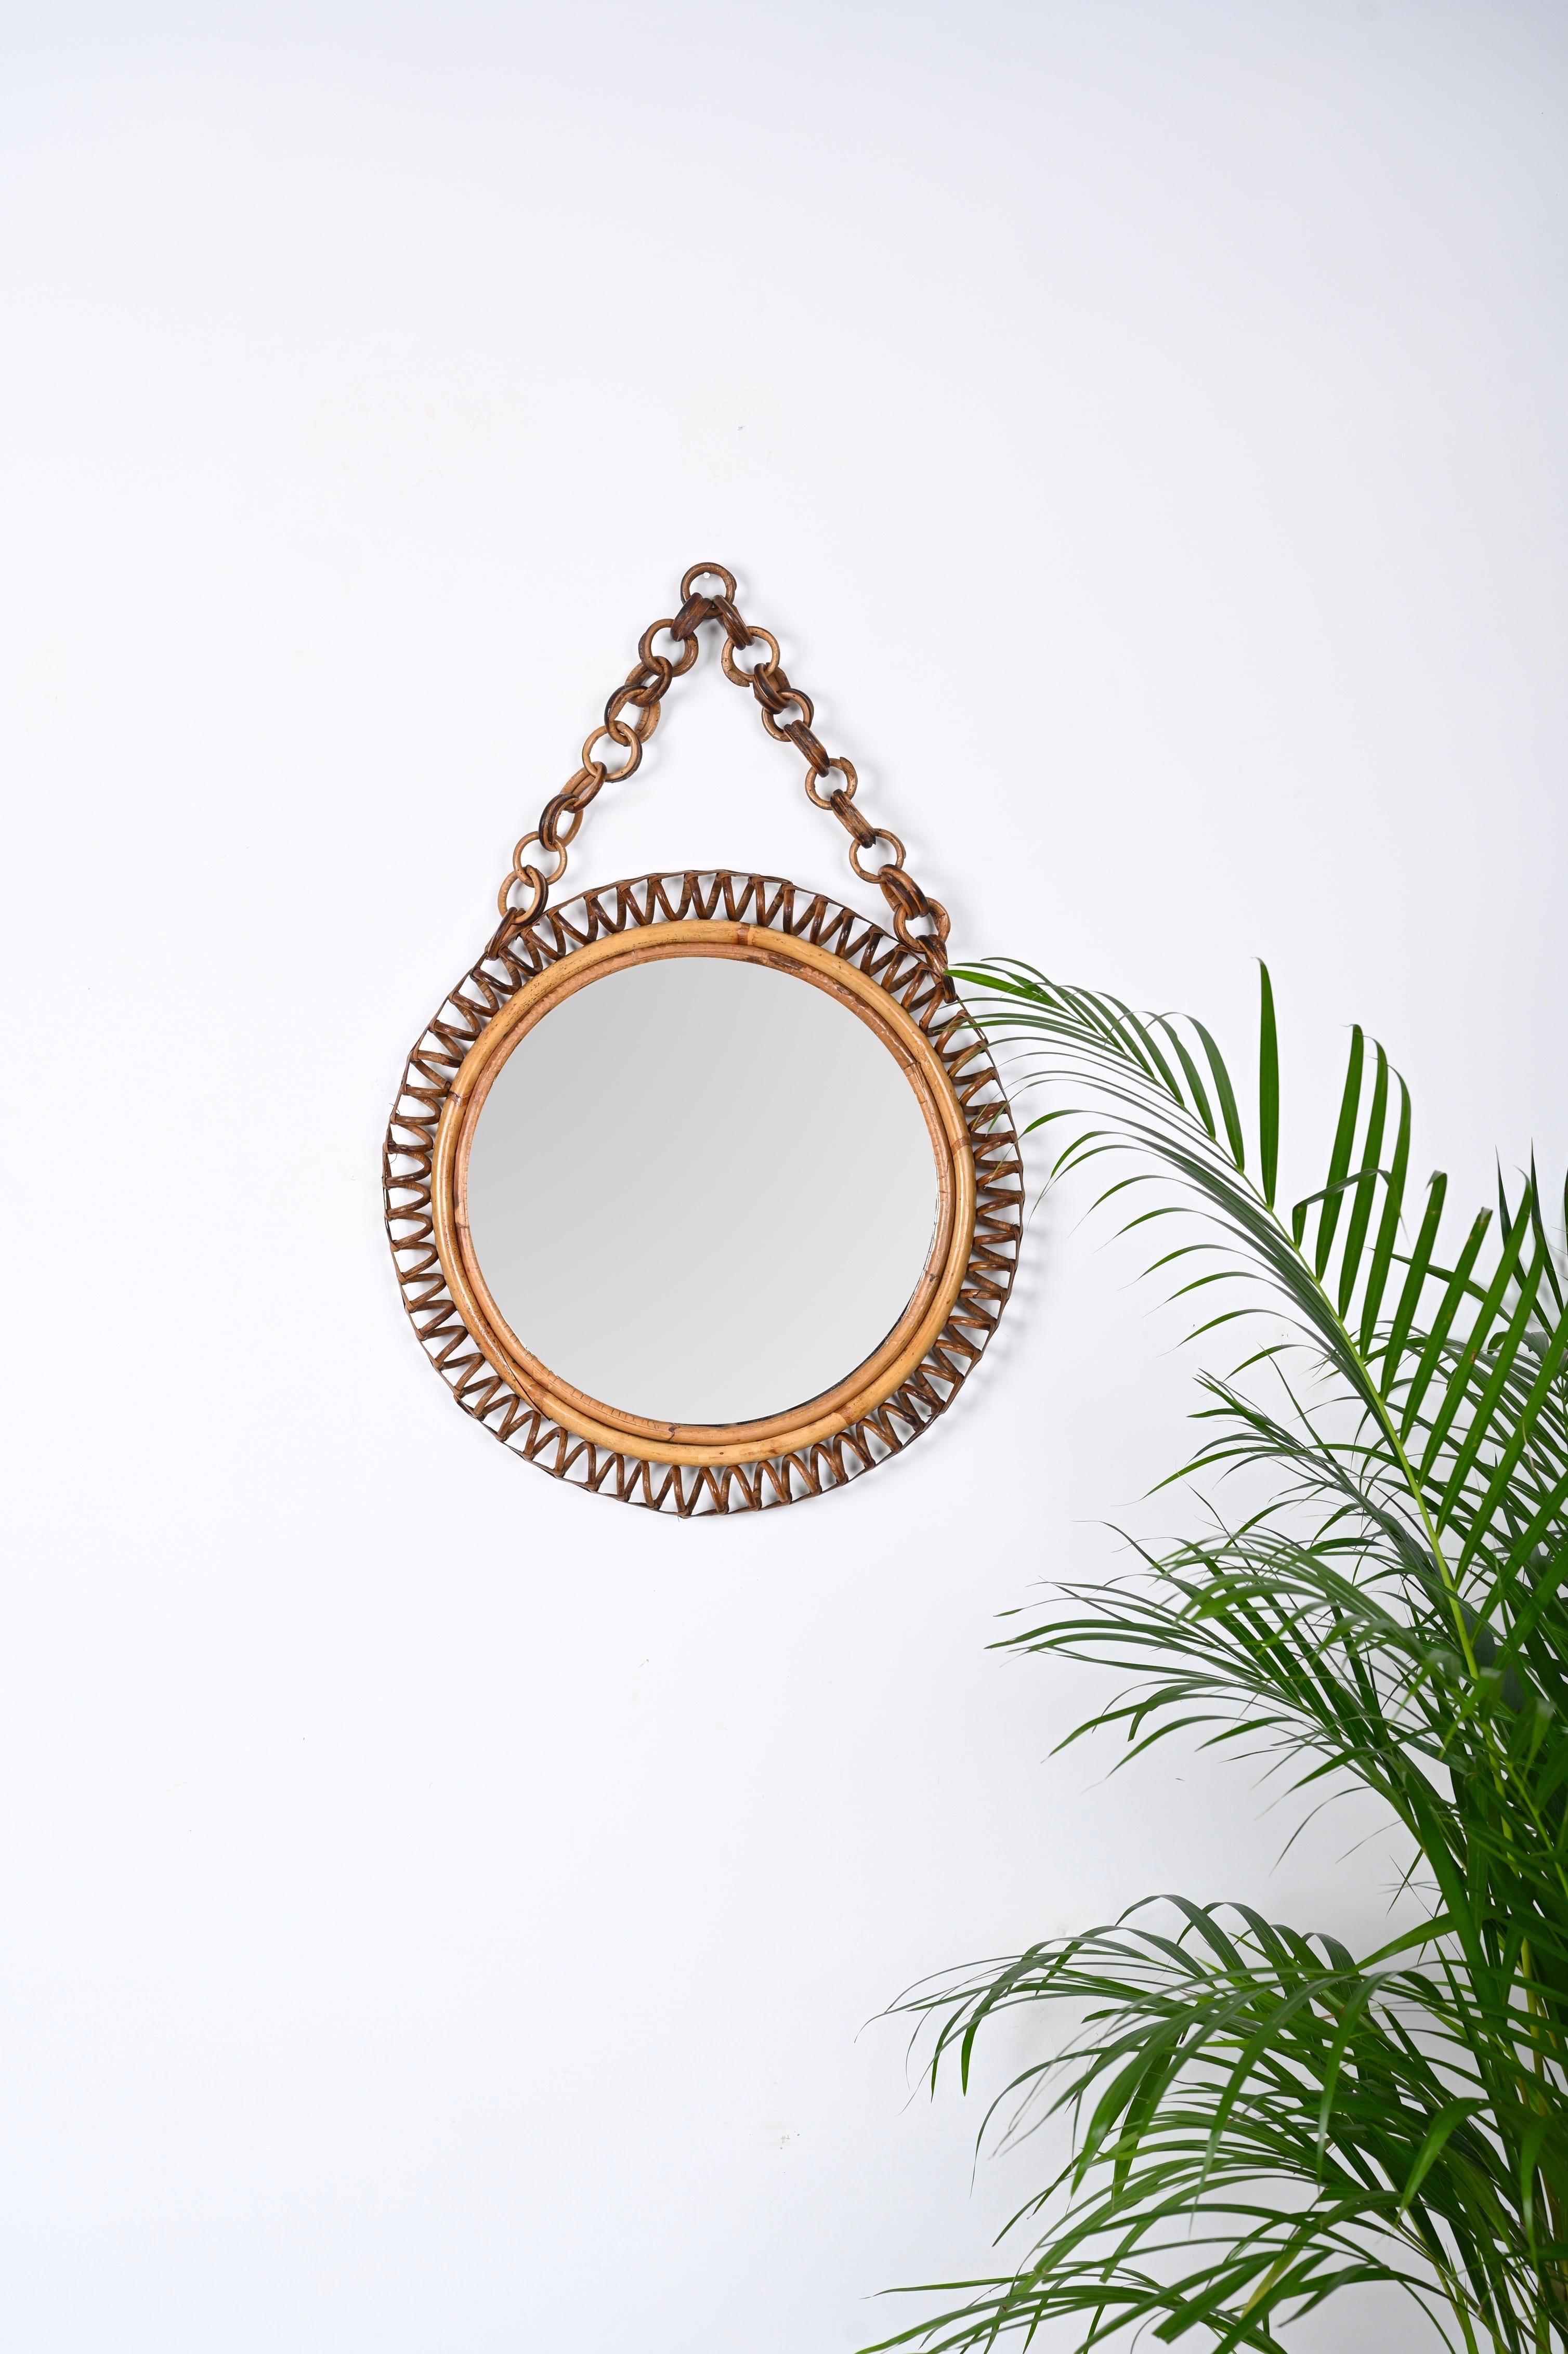 Amazing midcentury round rattan wall mirror. This Mid-Century Modern mirror was is attributed to Franco Albini and was produced in the 1960s in Italy.

The mirror features an incredible 